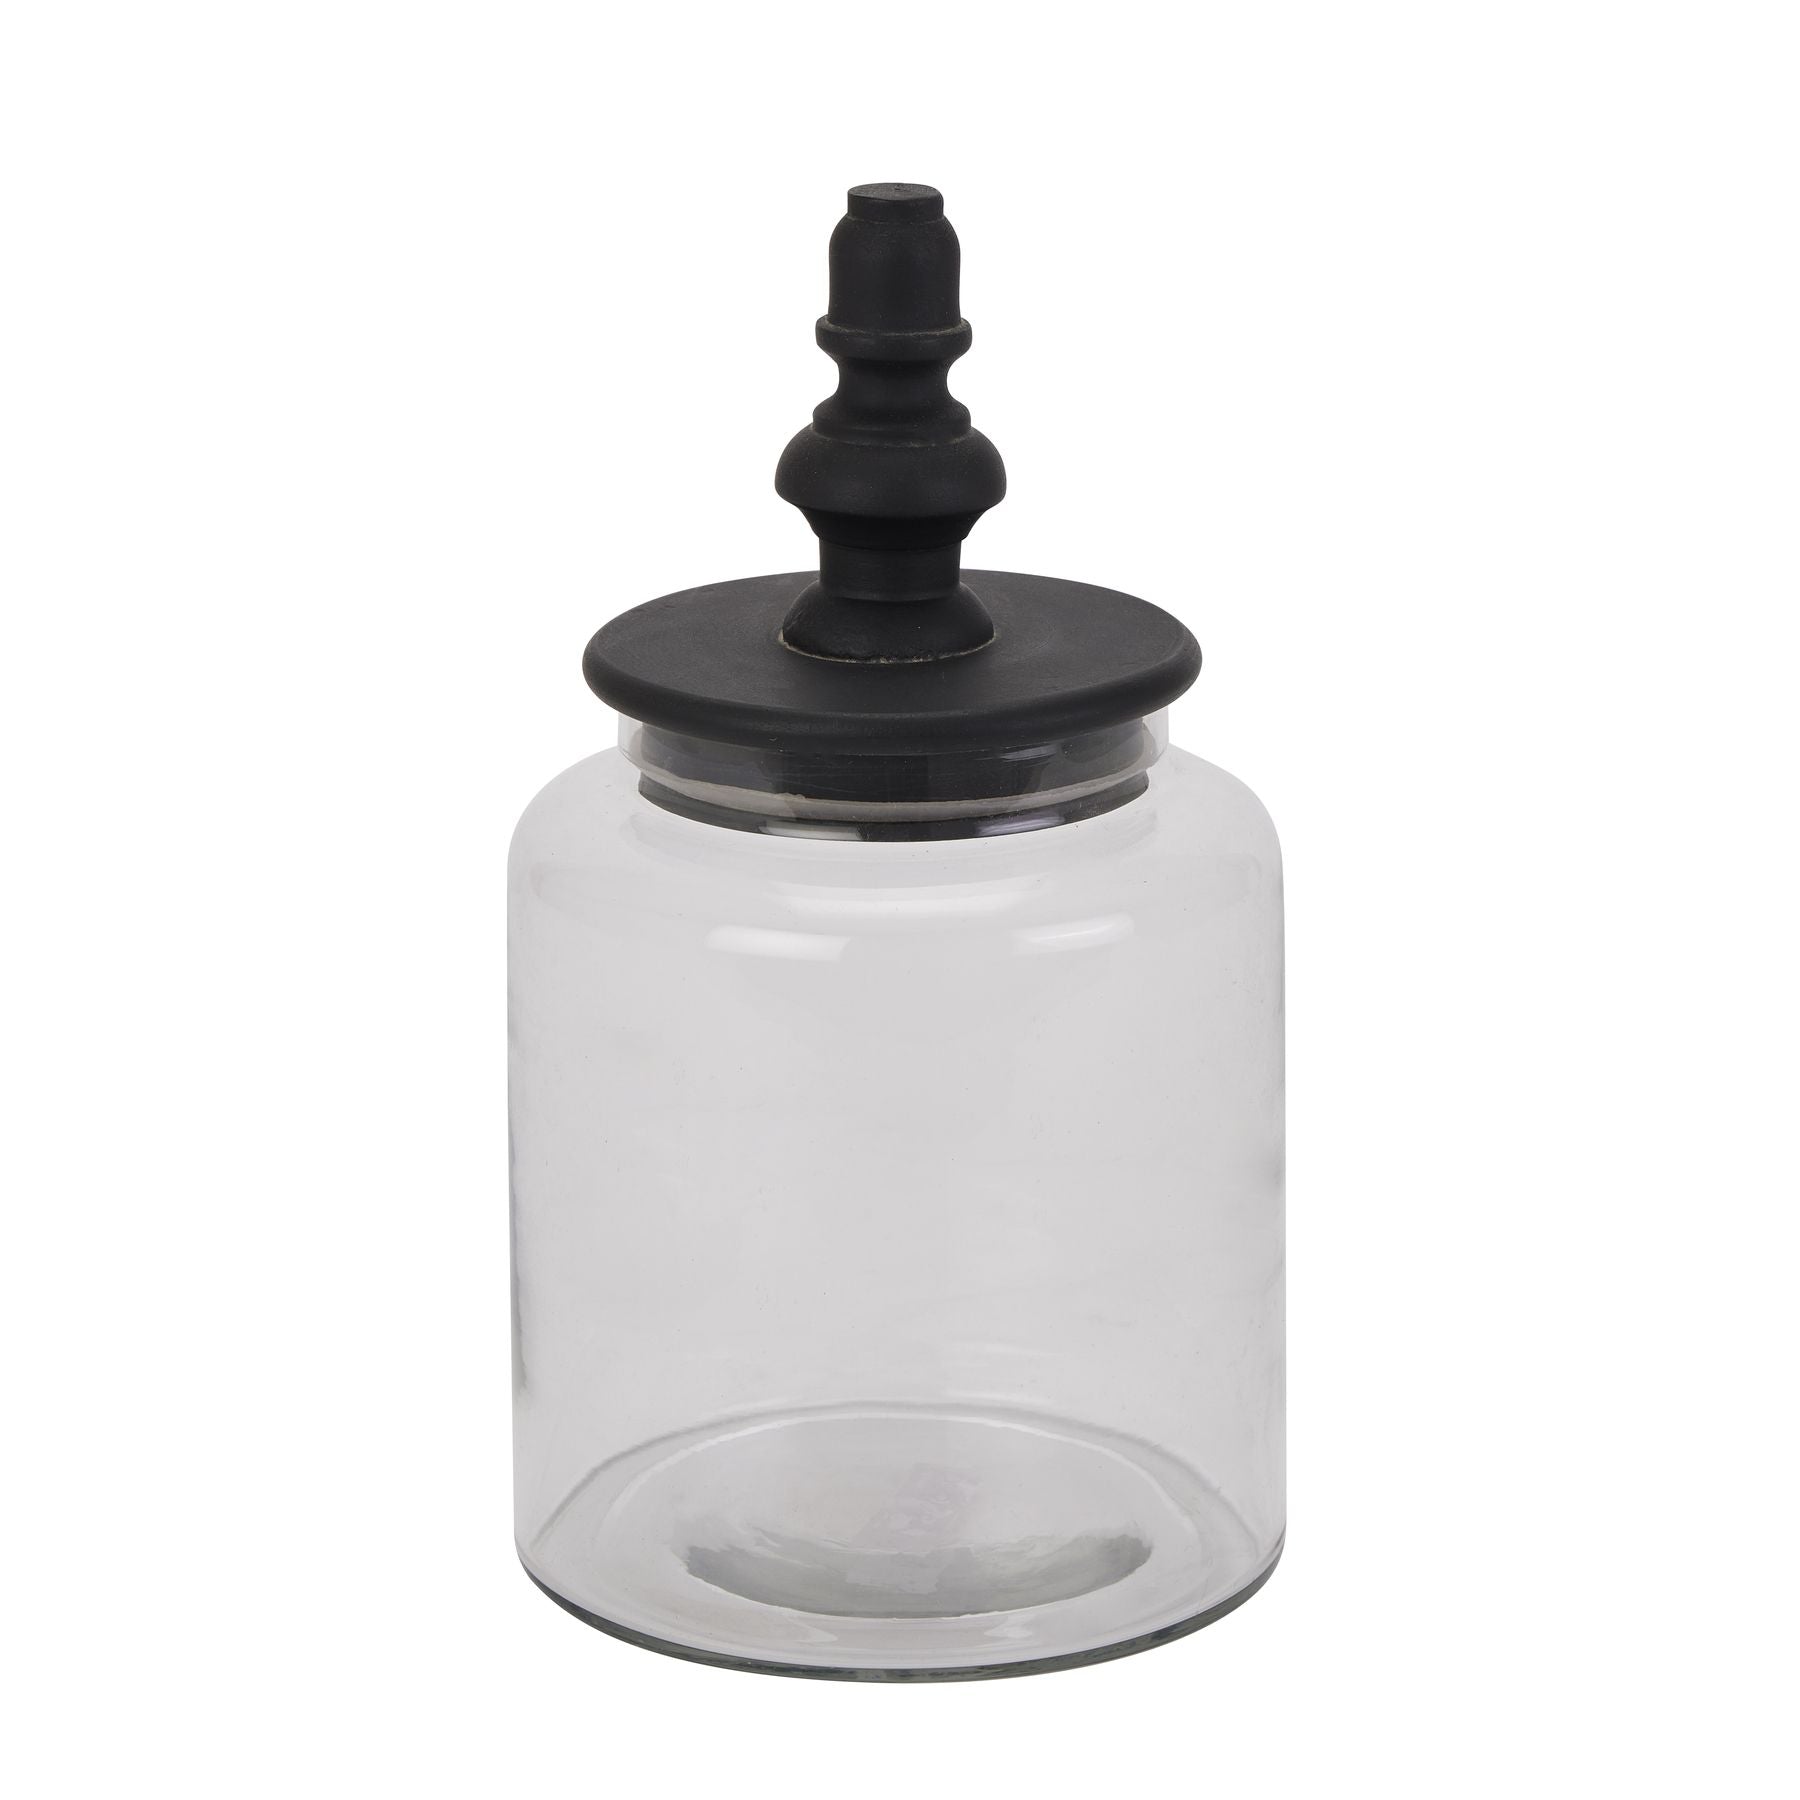 Black Finial Glass Canister